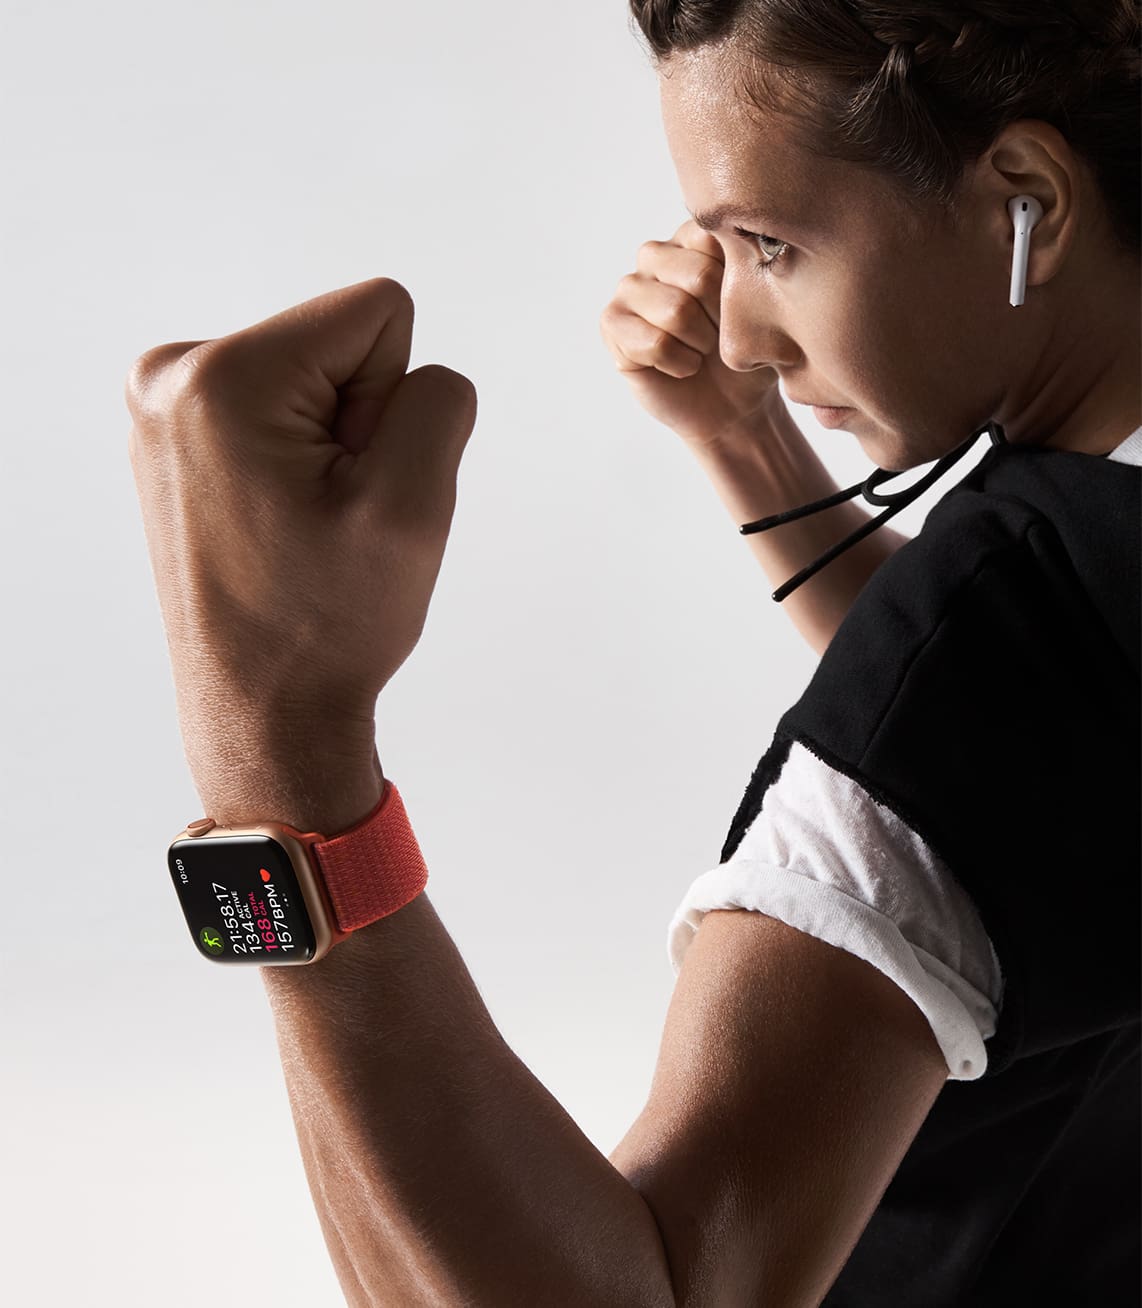 INTRODUCING: The Apple Watch Series 4, you might not think it’s a watch, but it’s definitely a powerful health and fitness tool